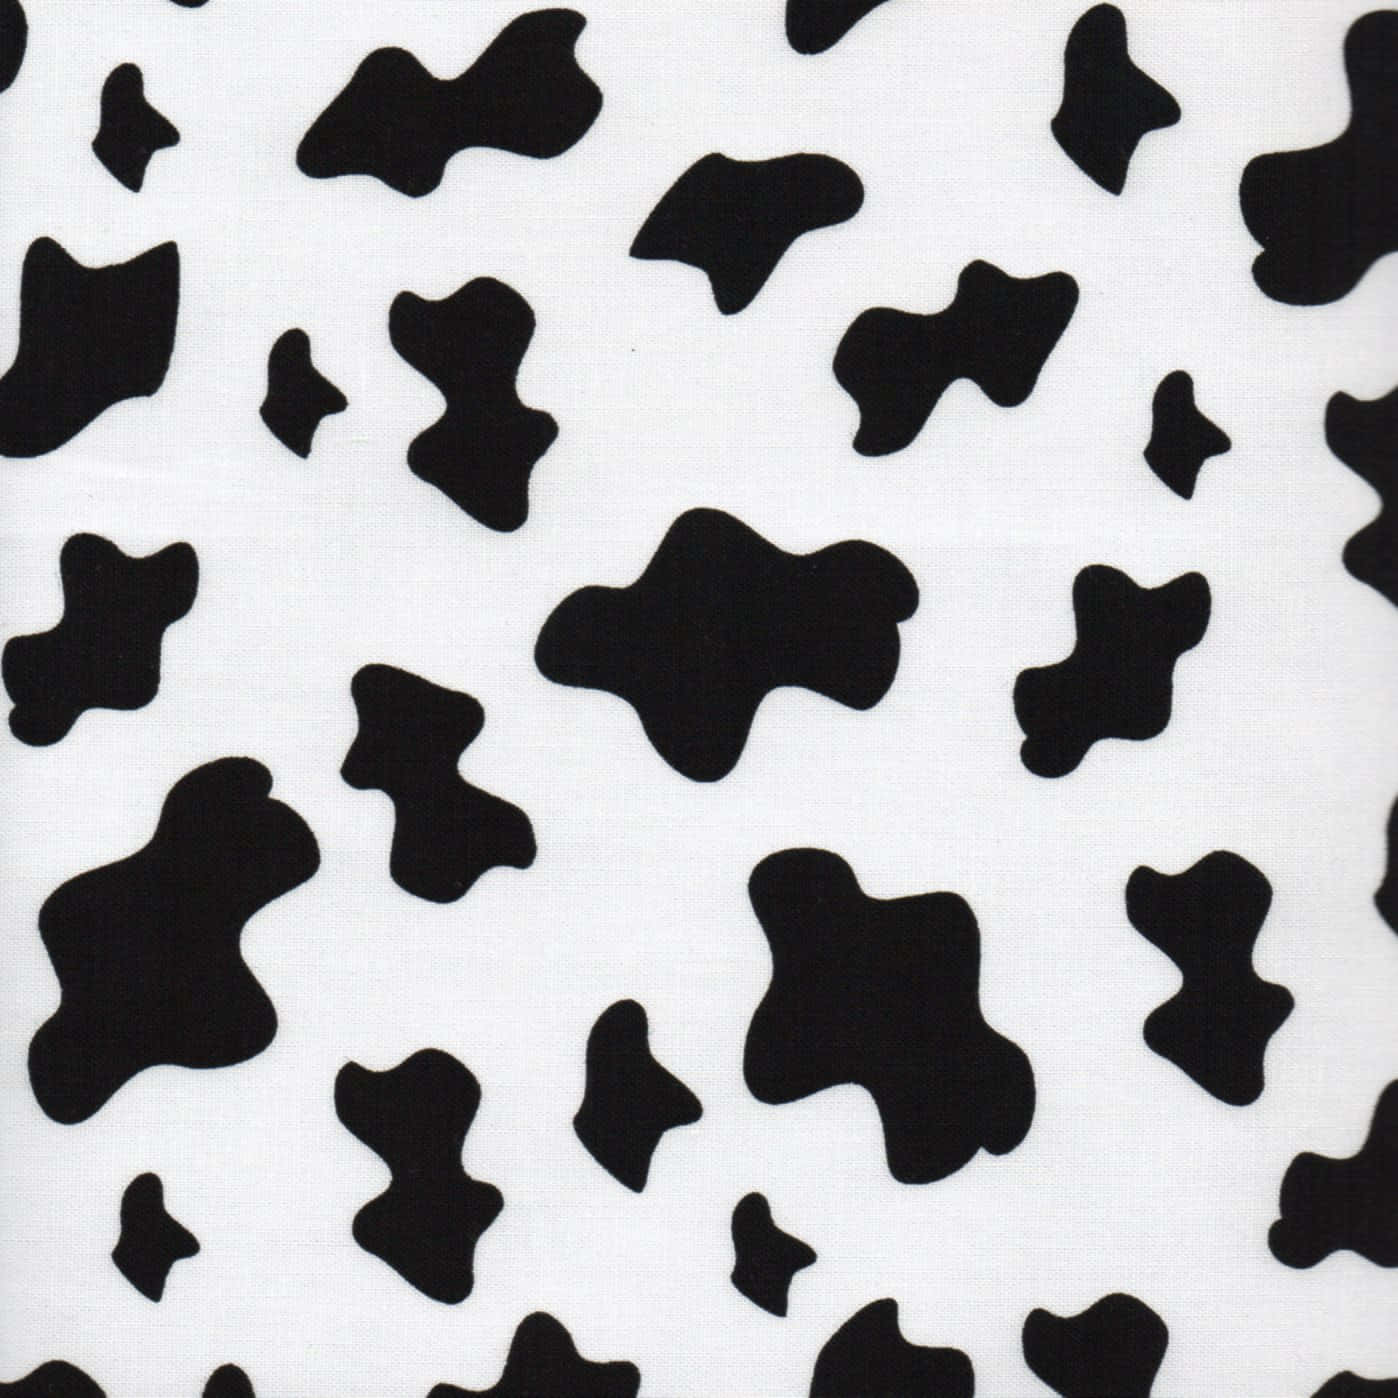 Minimalist Aesthetic Cow Print in Black and Grey Wallpaper